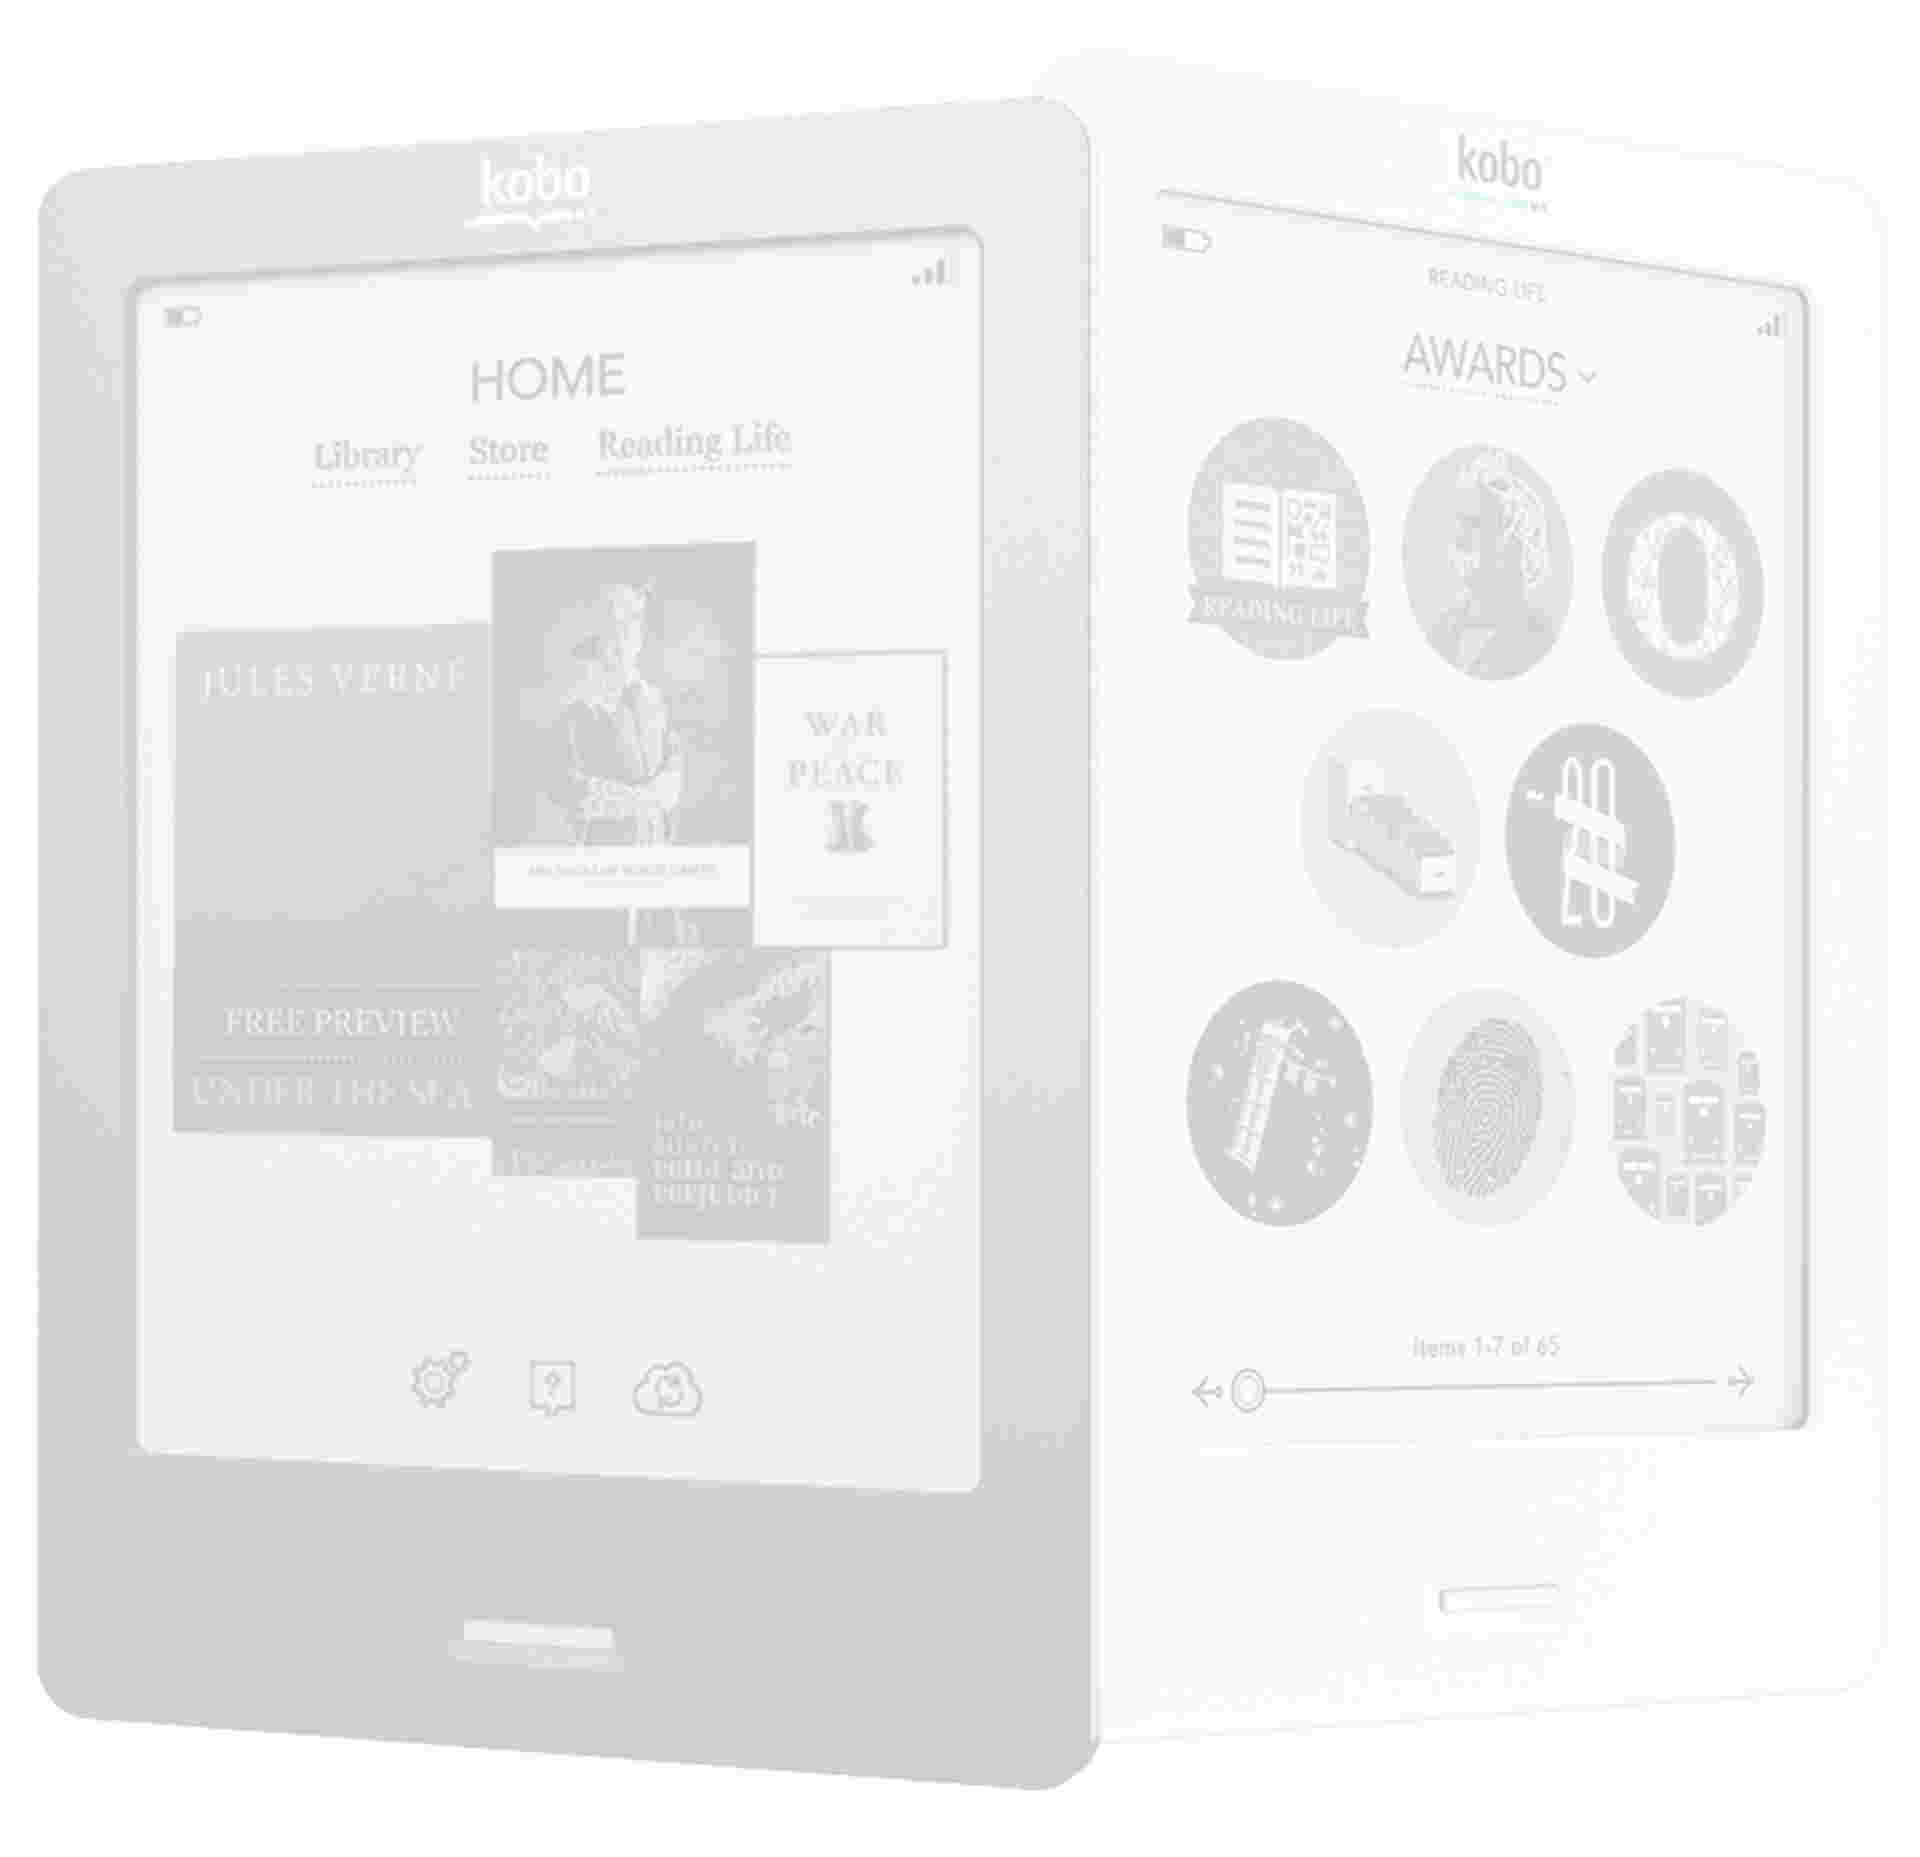 Kobo - featured_kobo_trilogy_angled_interface_7col